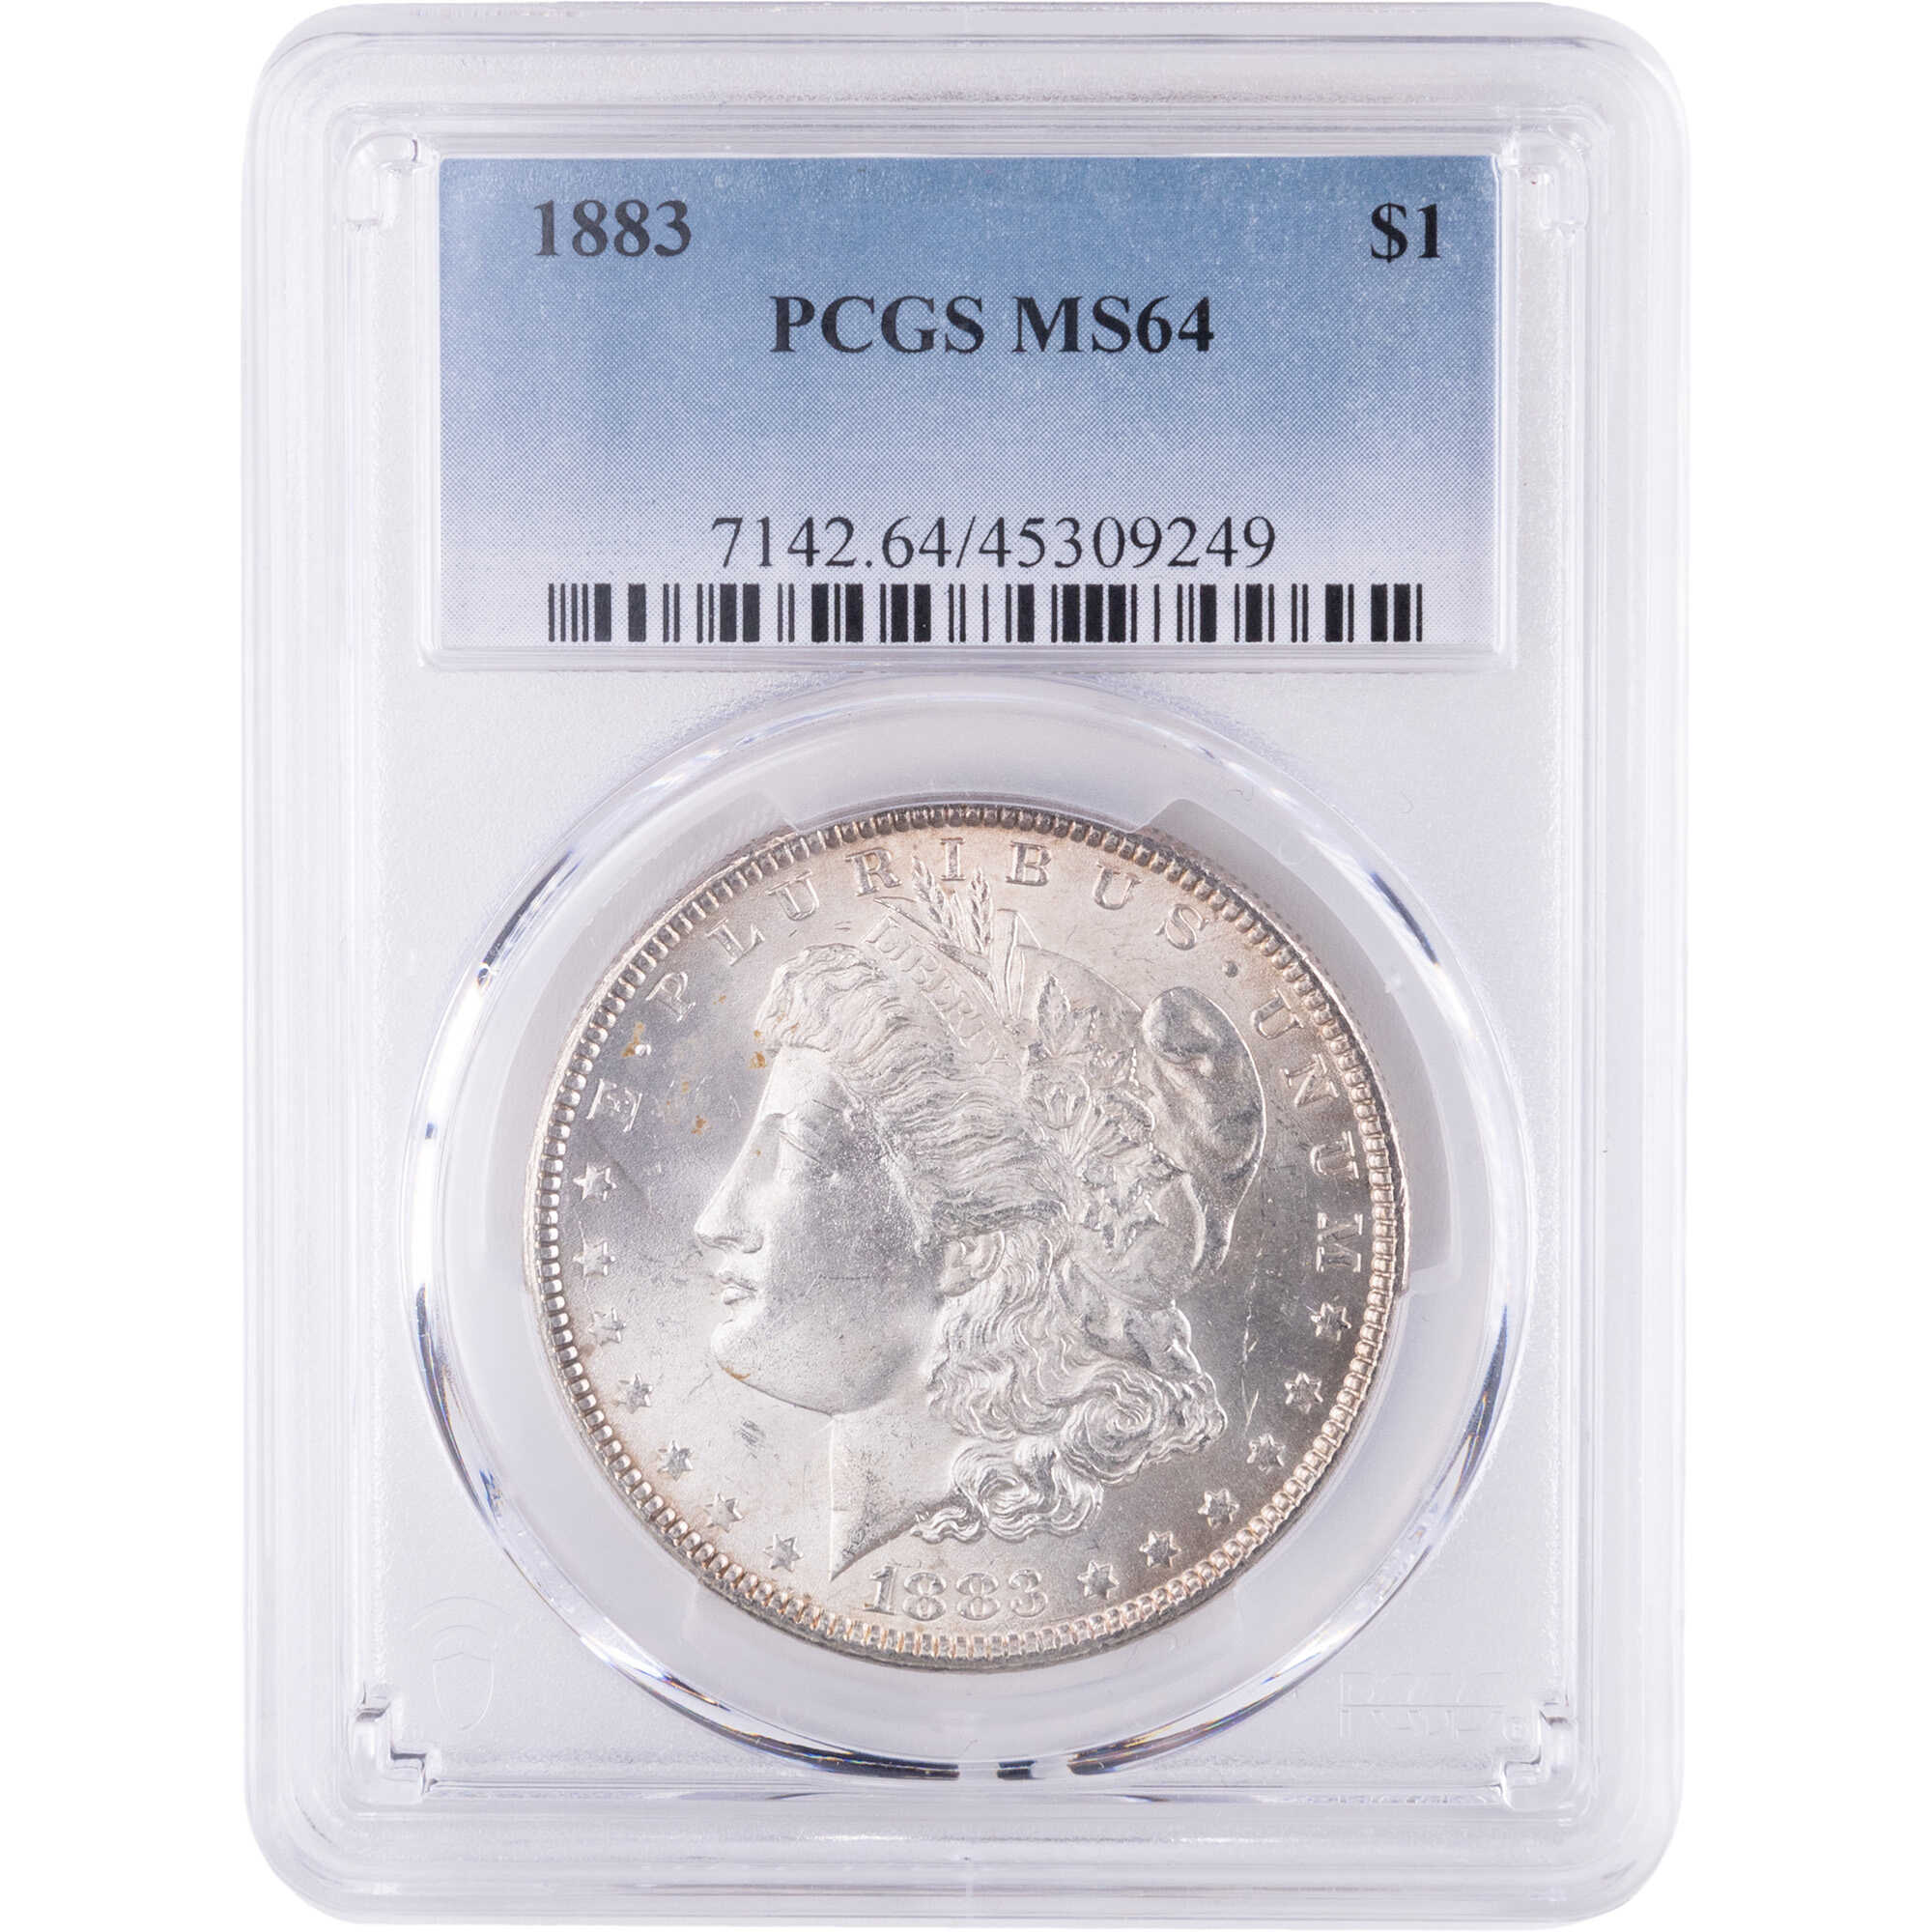 1883 Morgan Dollar MS 64 PCGS Silver $1 Uncirculated Coin SKU:CPC12860 - Morgan coin - Morgan silver dollar - Morgan silver dollar for sale - Profile Coins &amp; Collectibles